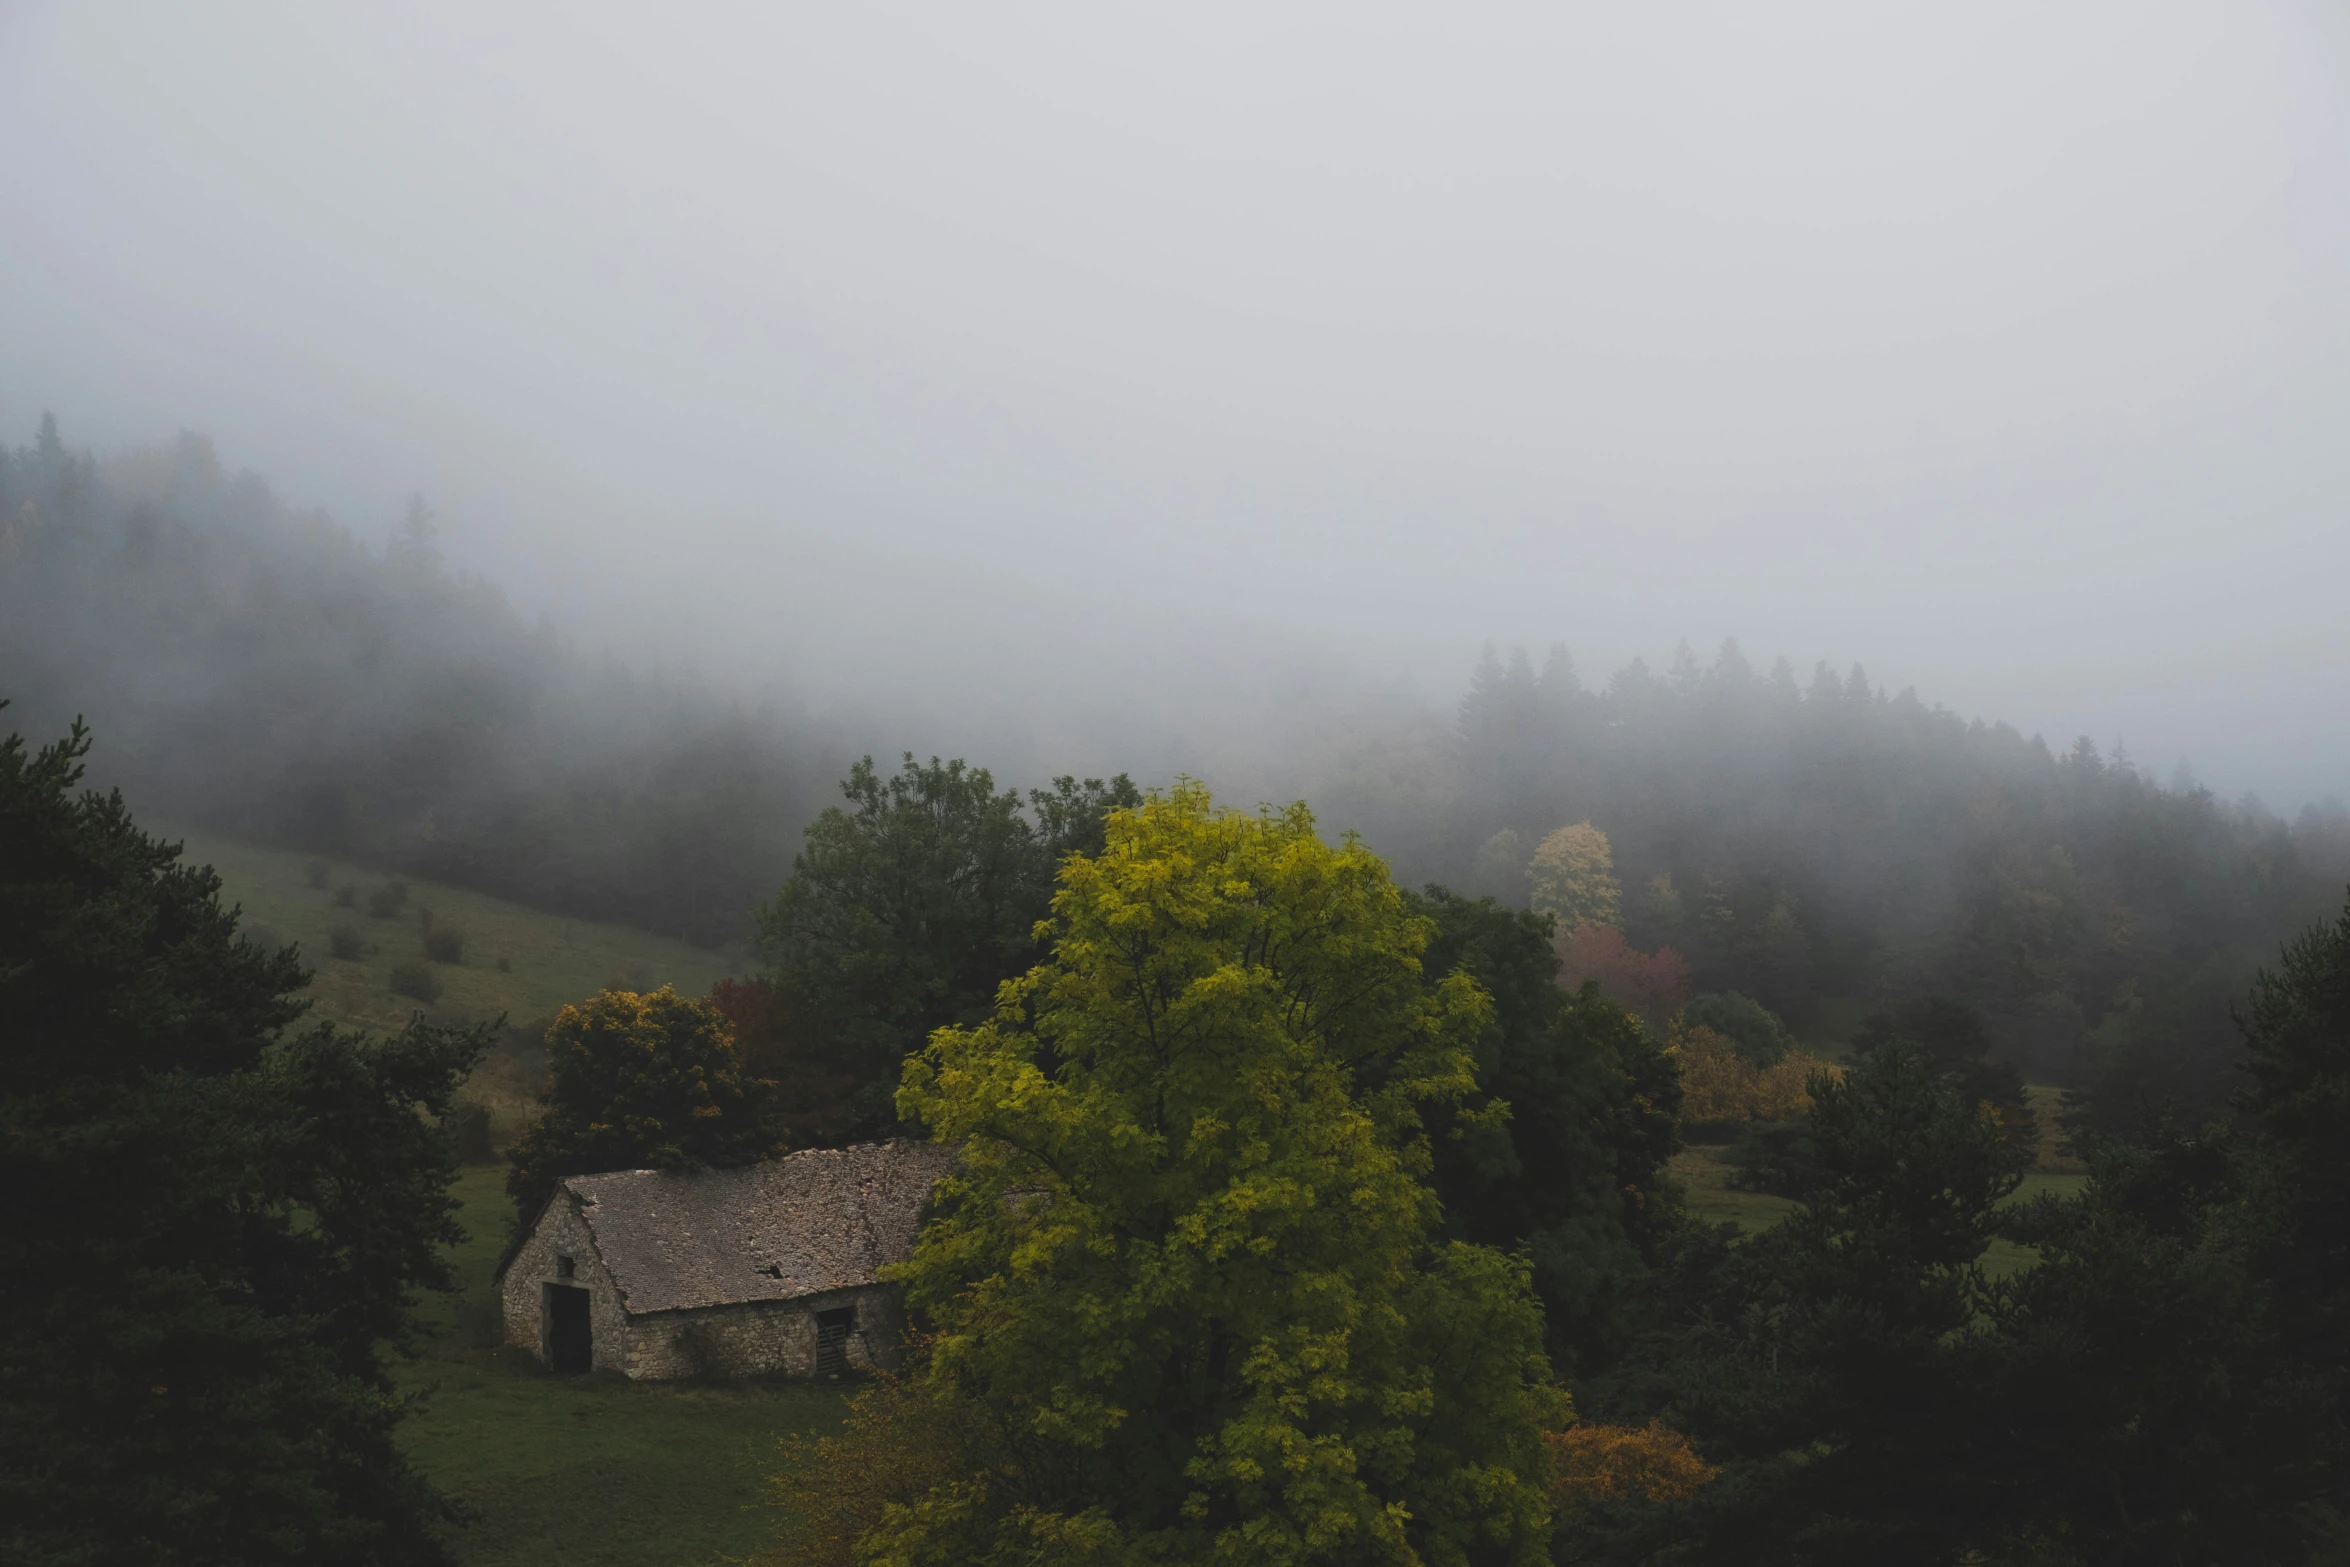 fog hovers around a stone cabin in a field